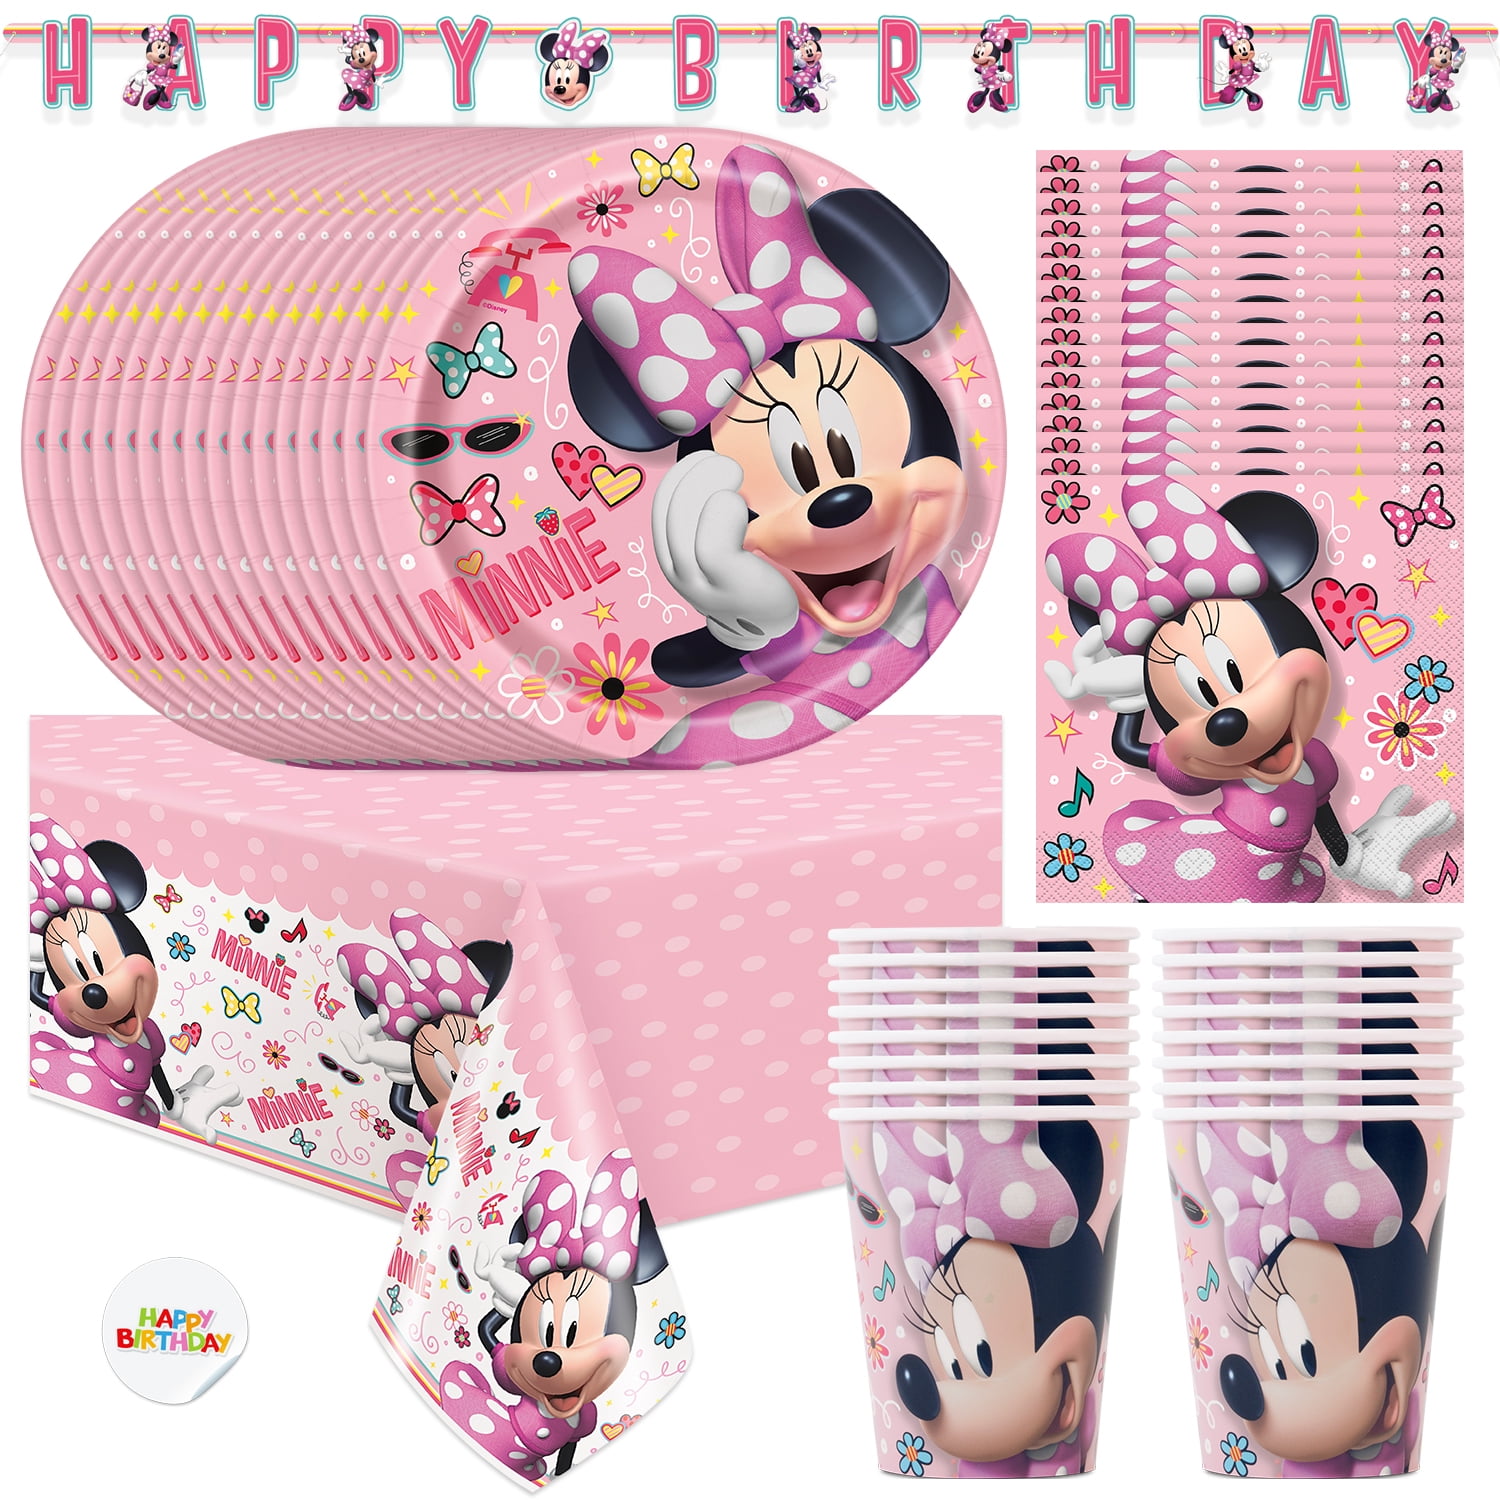 Zyozi Minnie Mouse Party Decoration Set, Minnie Mouse Themed Party Kit  Banner, Cake Topper, Cup Cake